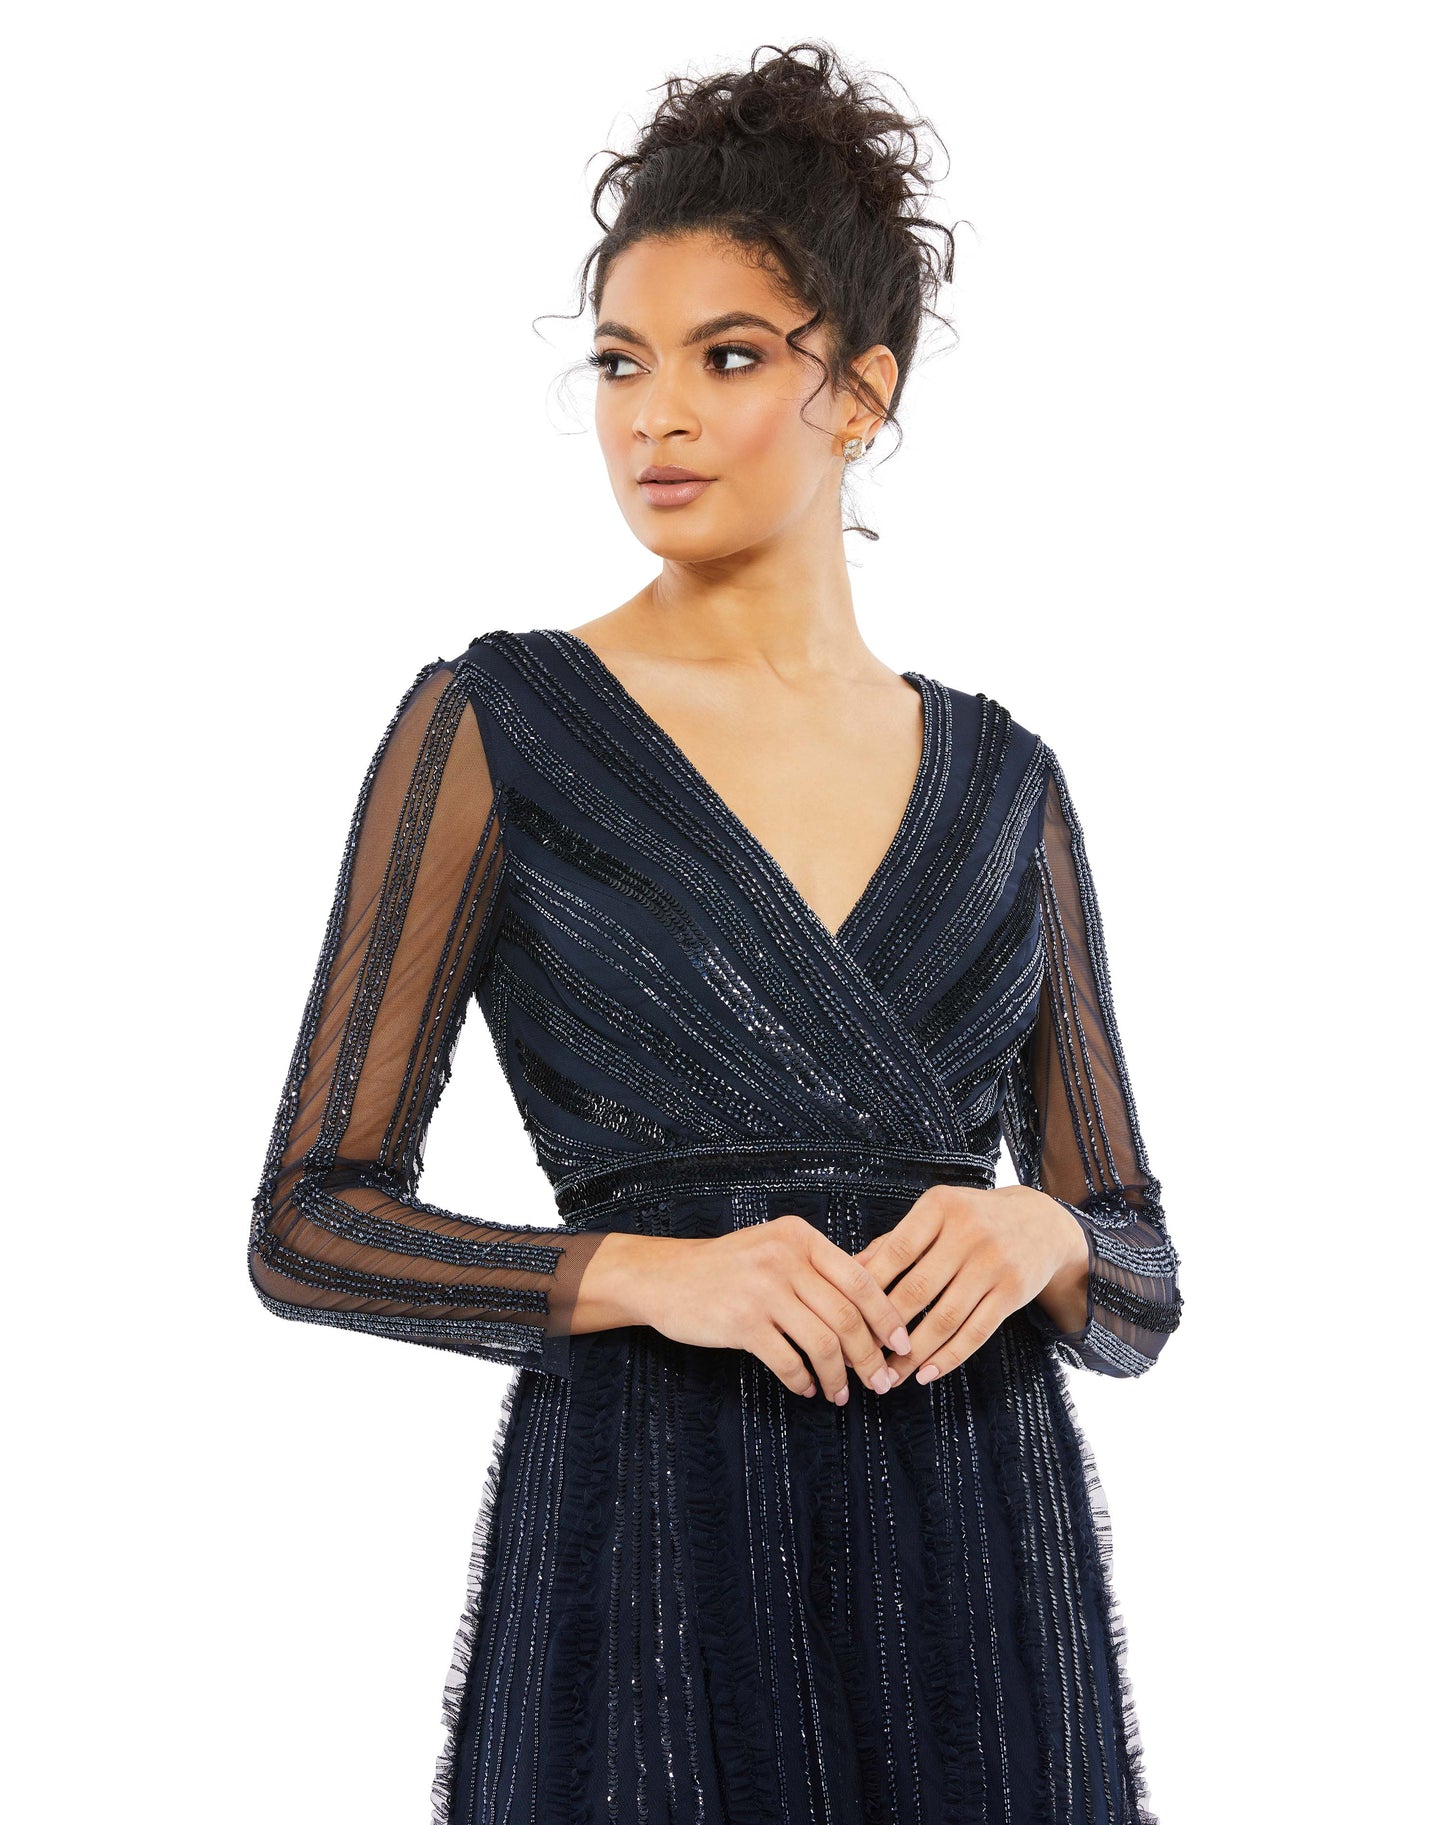 Elegant evening gown with a faux-wrap v-neckline, long illusion sleeves, and a floor-length skirt. The bodice and sleeves feature rows of sequins and beads throughout the mesh, and the skirt is embellished with elongating rows of beads, sequins, and subtl